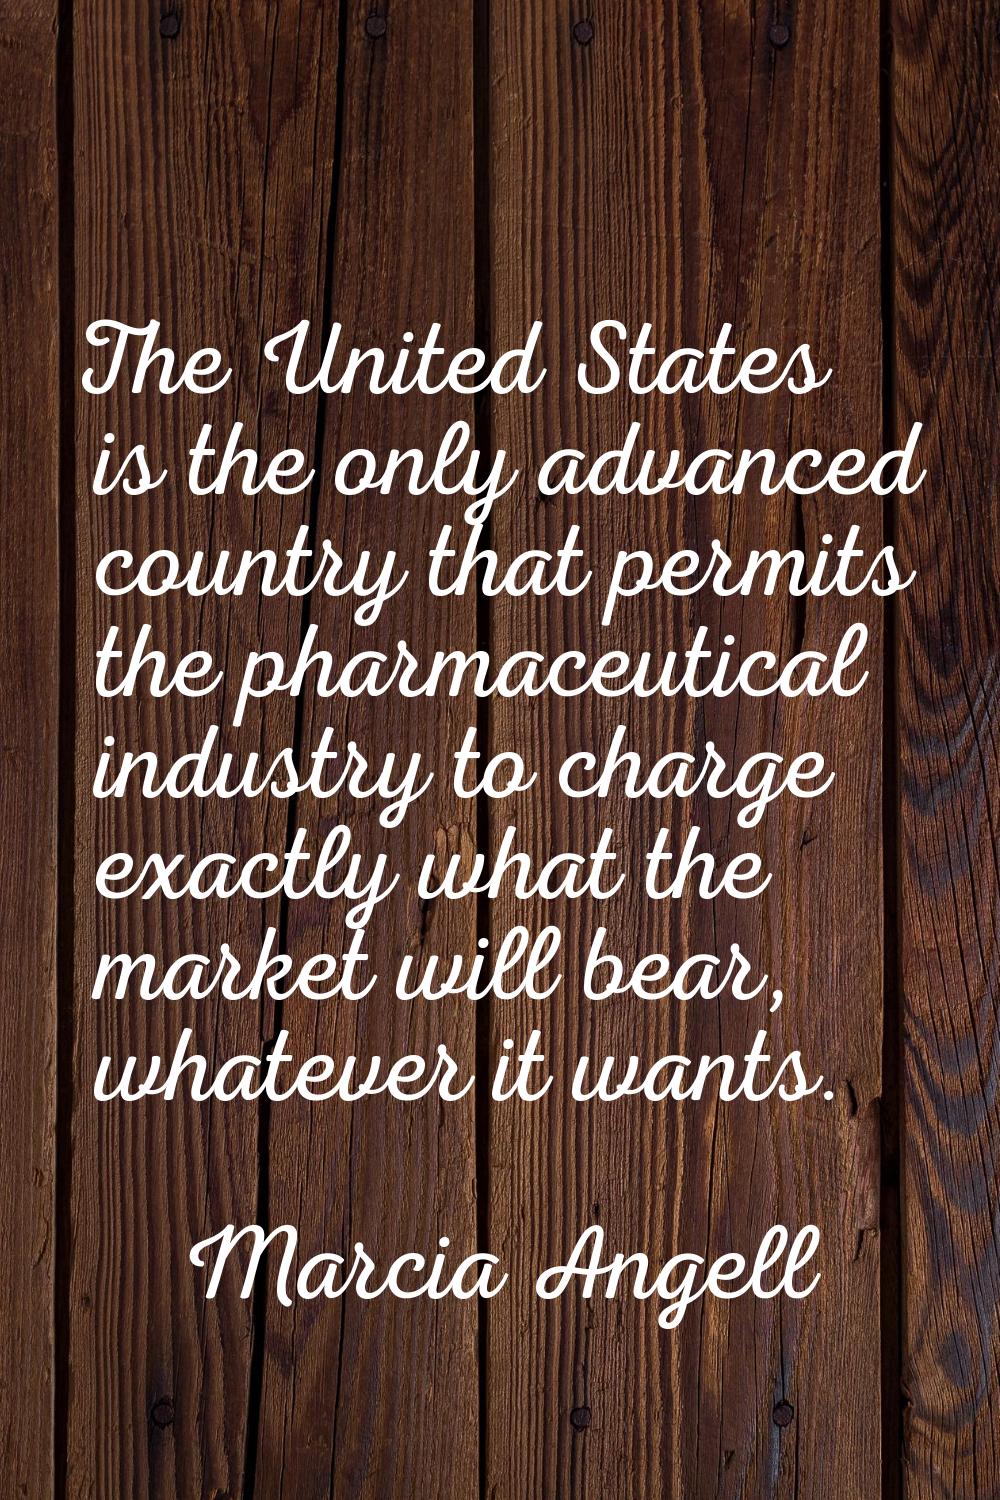 The United States is the only advanced country that permits the pharmaceutical industry to charge e